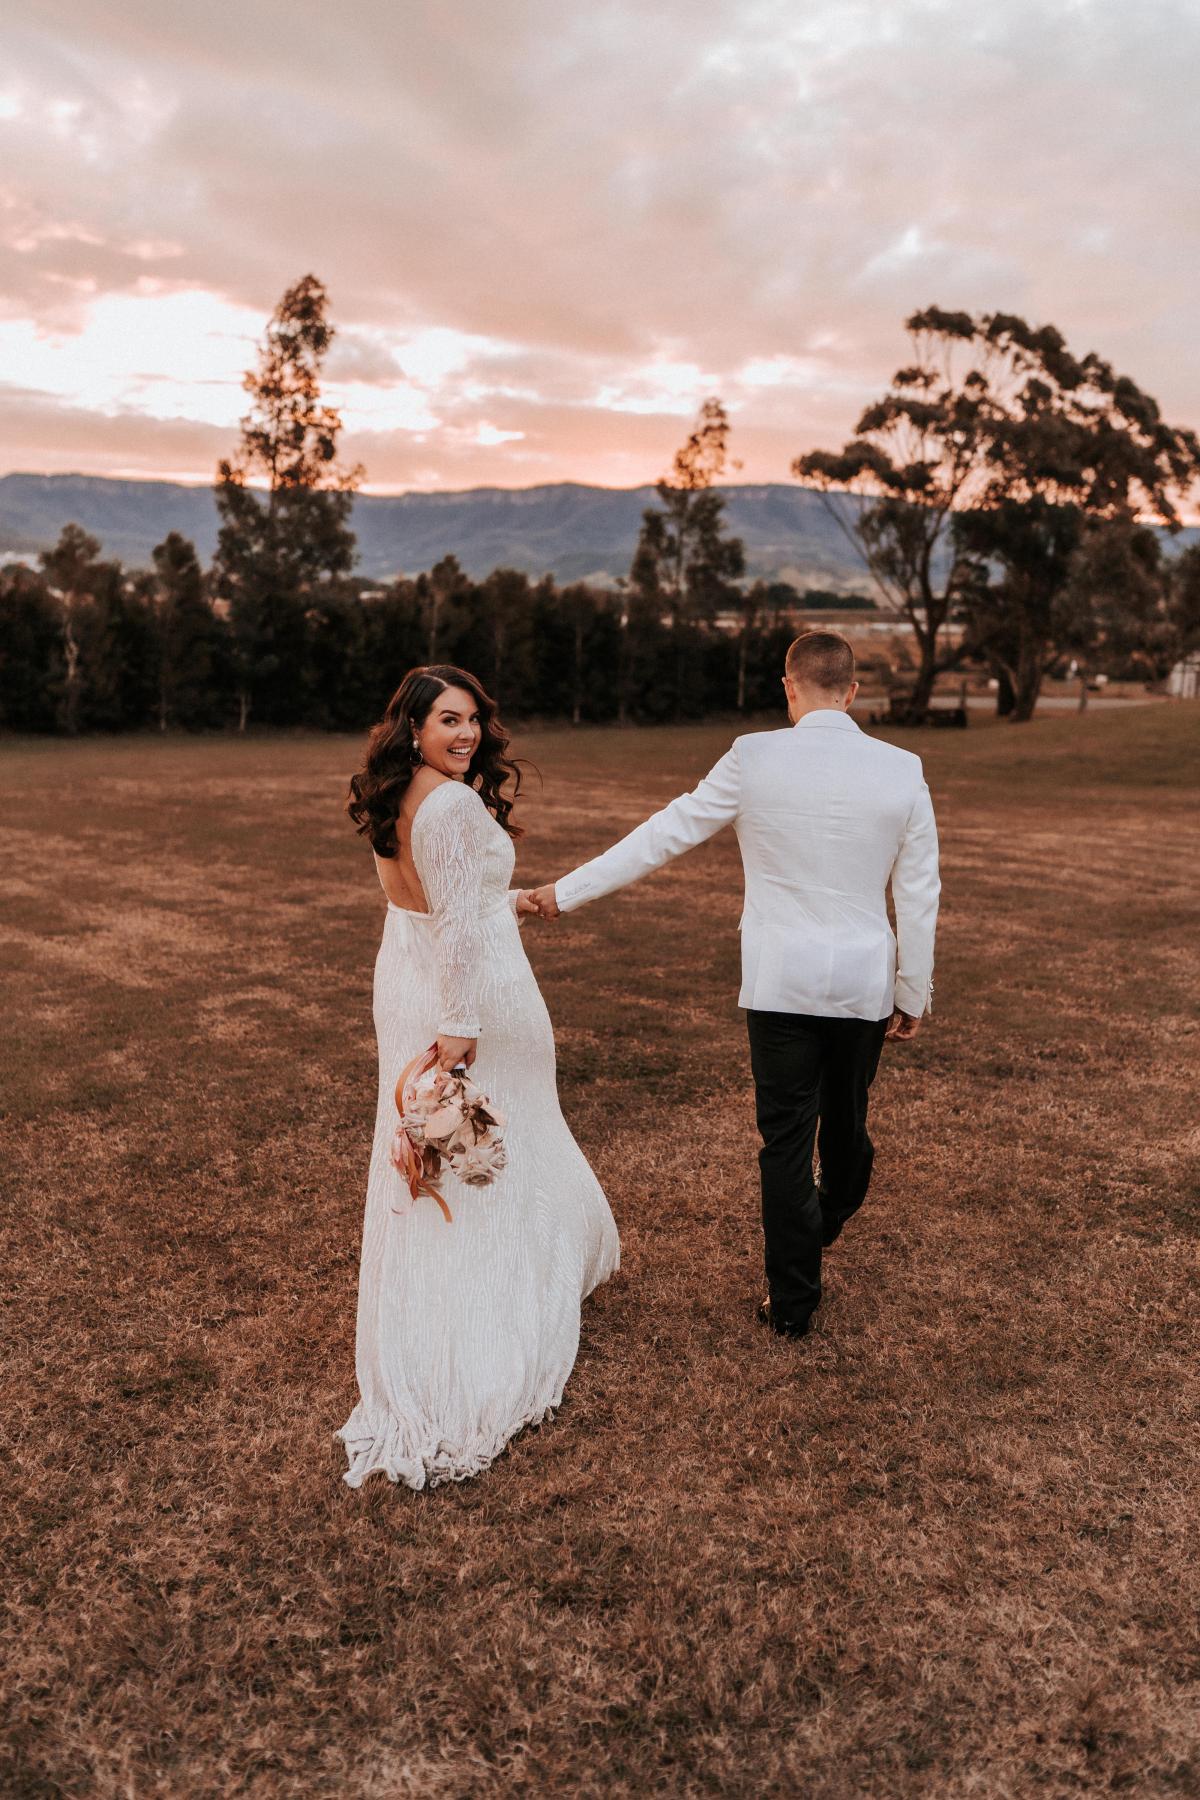 KWH real bride Katherine and Conor walk through a field together as the sunsets. She wears the Margareta gown, a backless high neck wedding dress